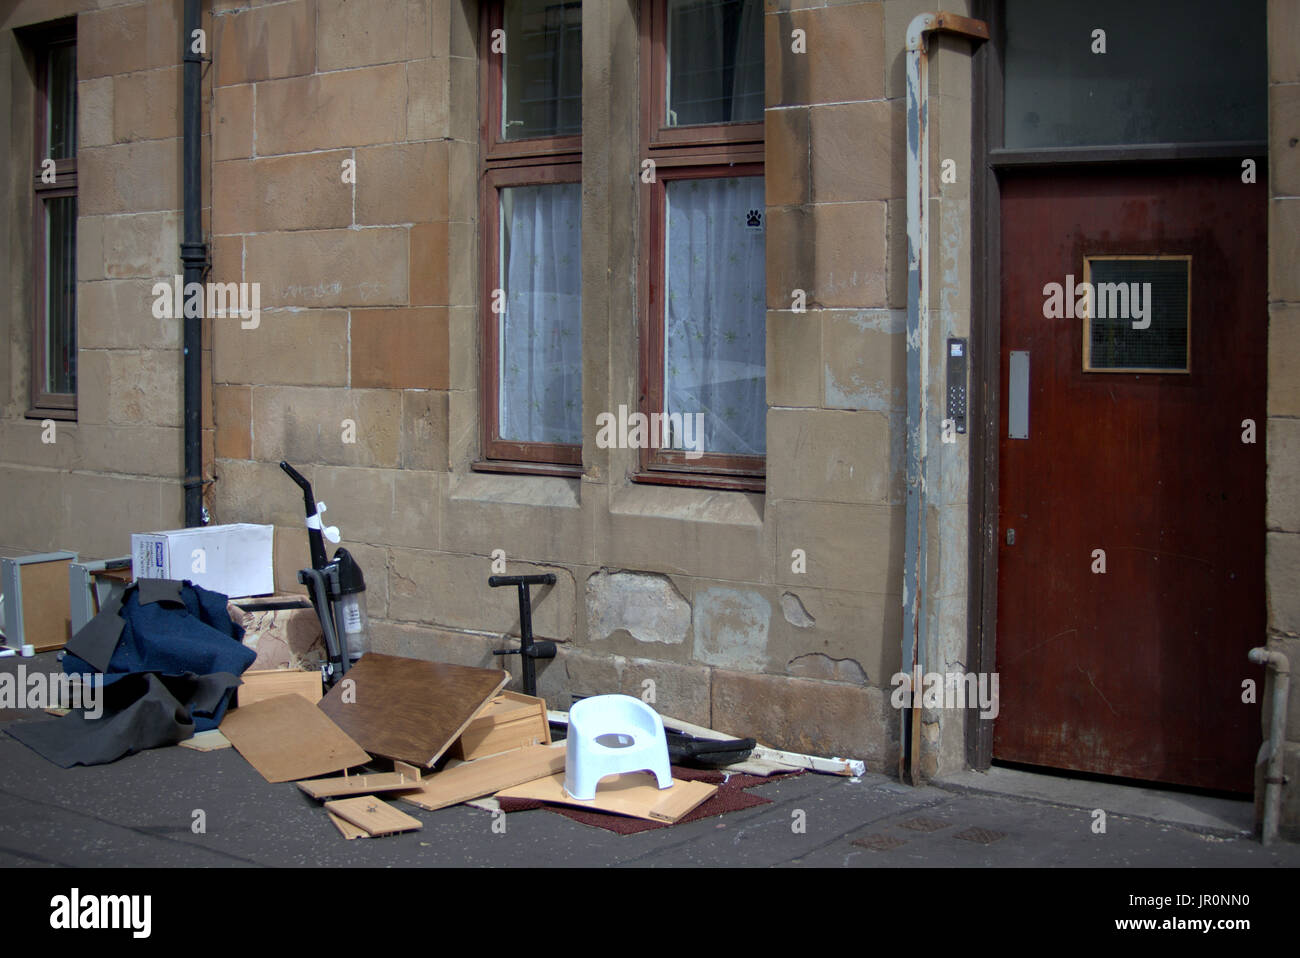 Govanhill Glasgow fly tipping rubbish on street Stock Photo